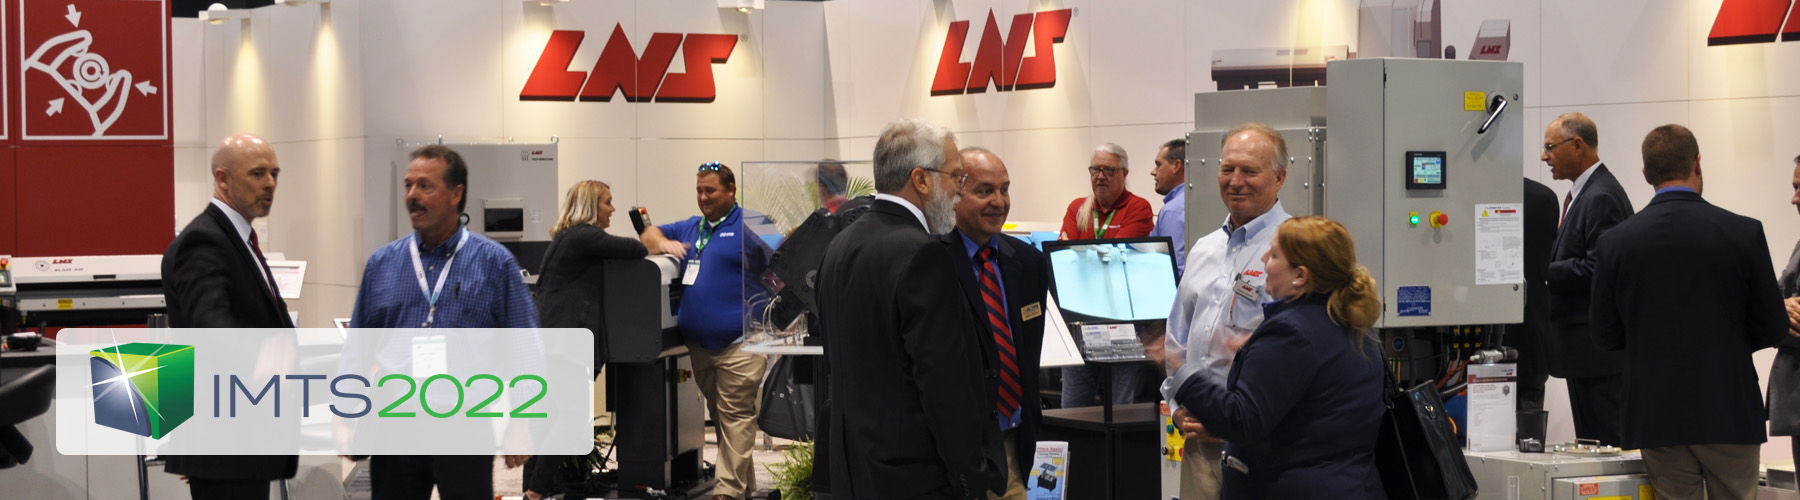 Join Us at IMTS 2022 in Chicago | LNS North America